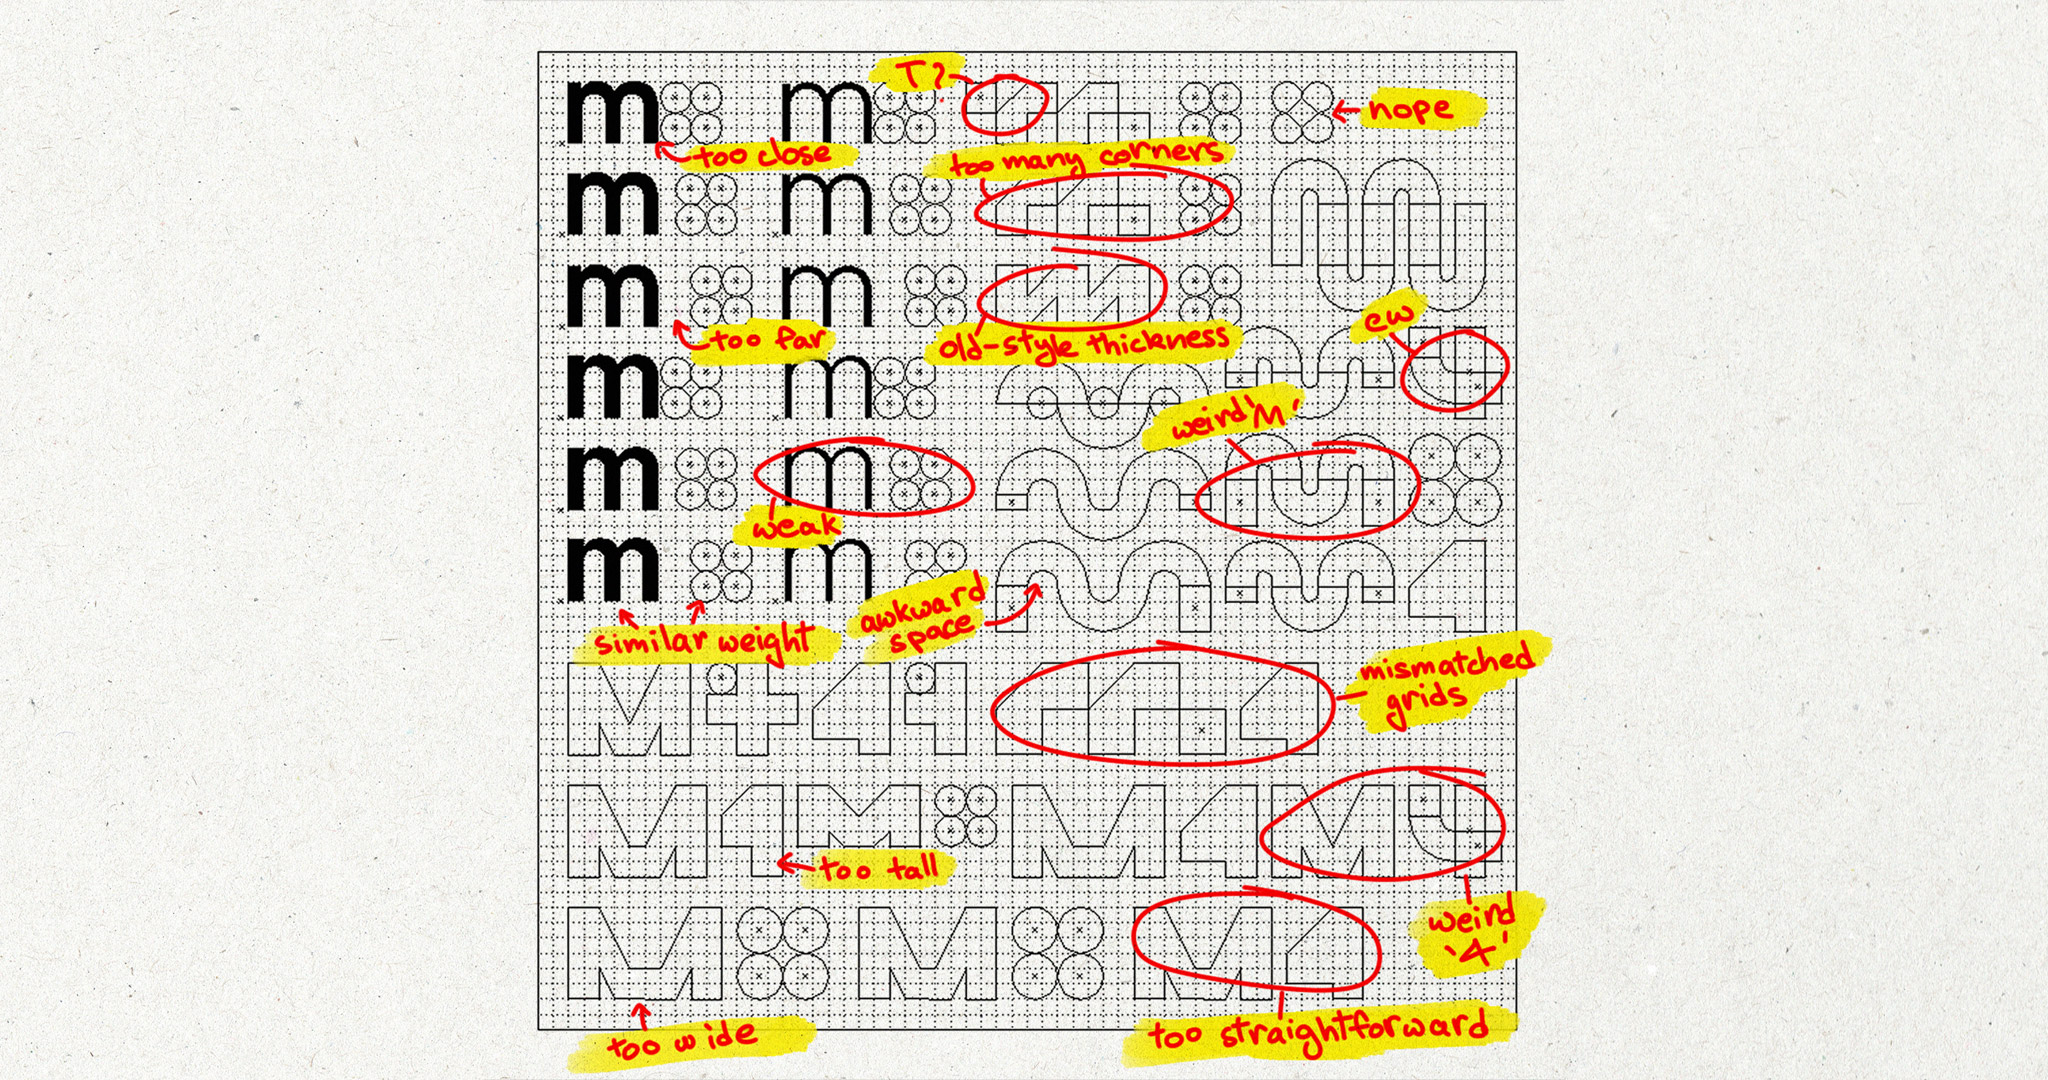 Logo prototypes sketched out on a grid, with design flaws overwritten in red marker.